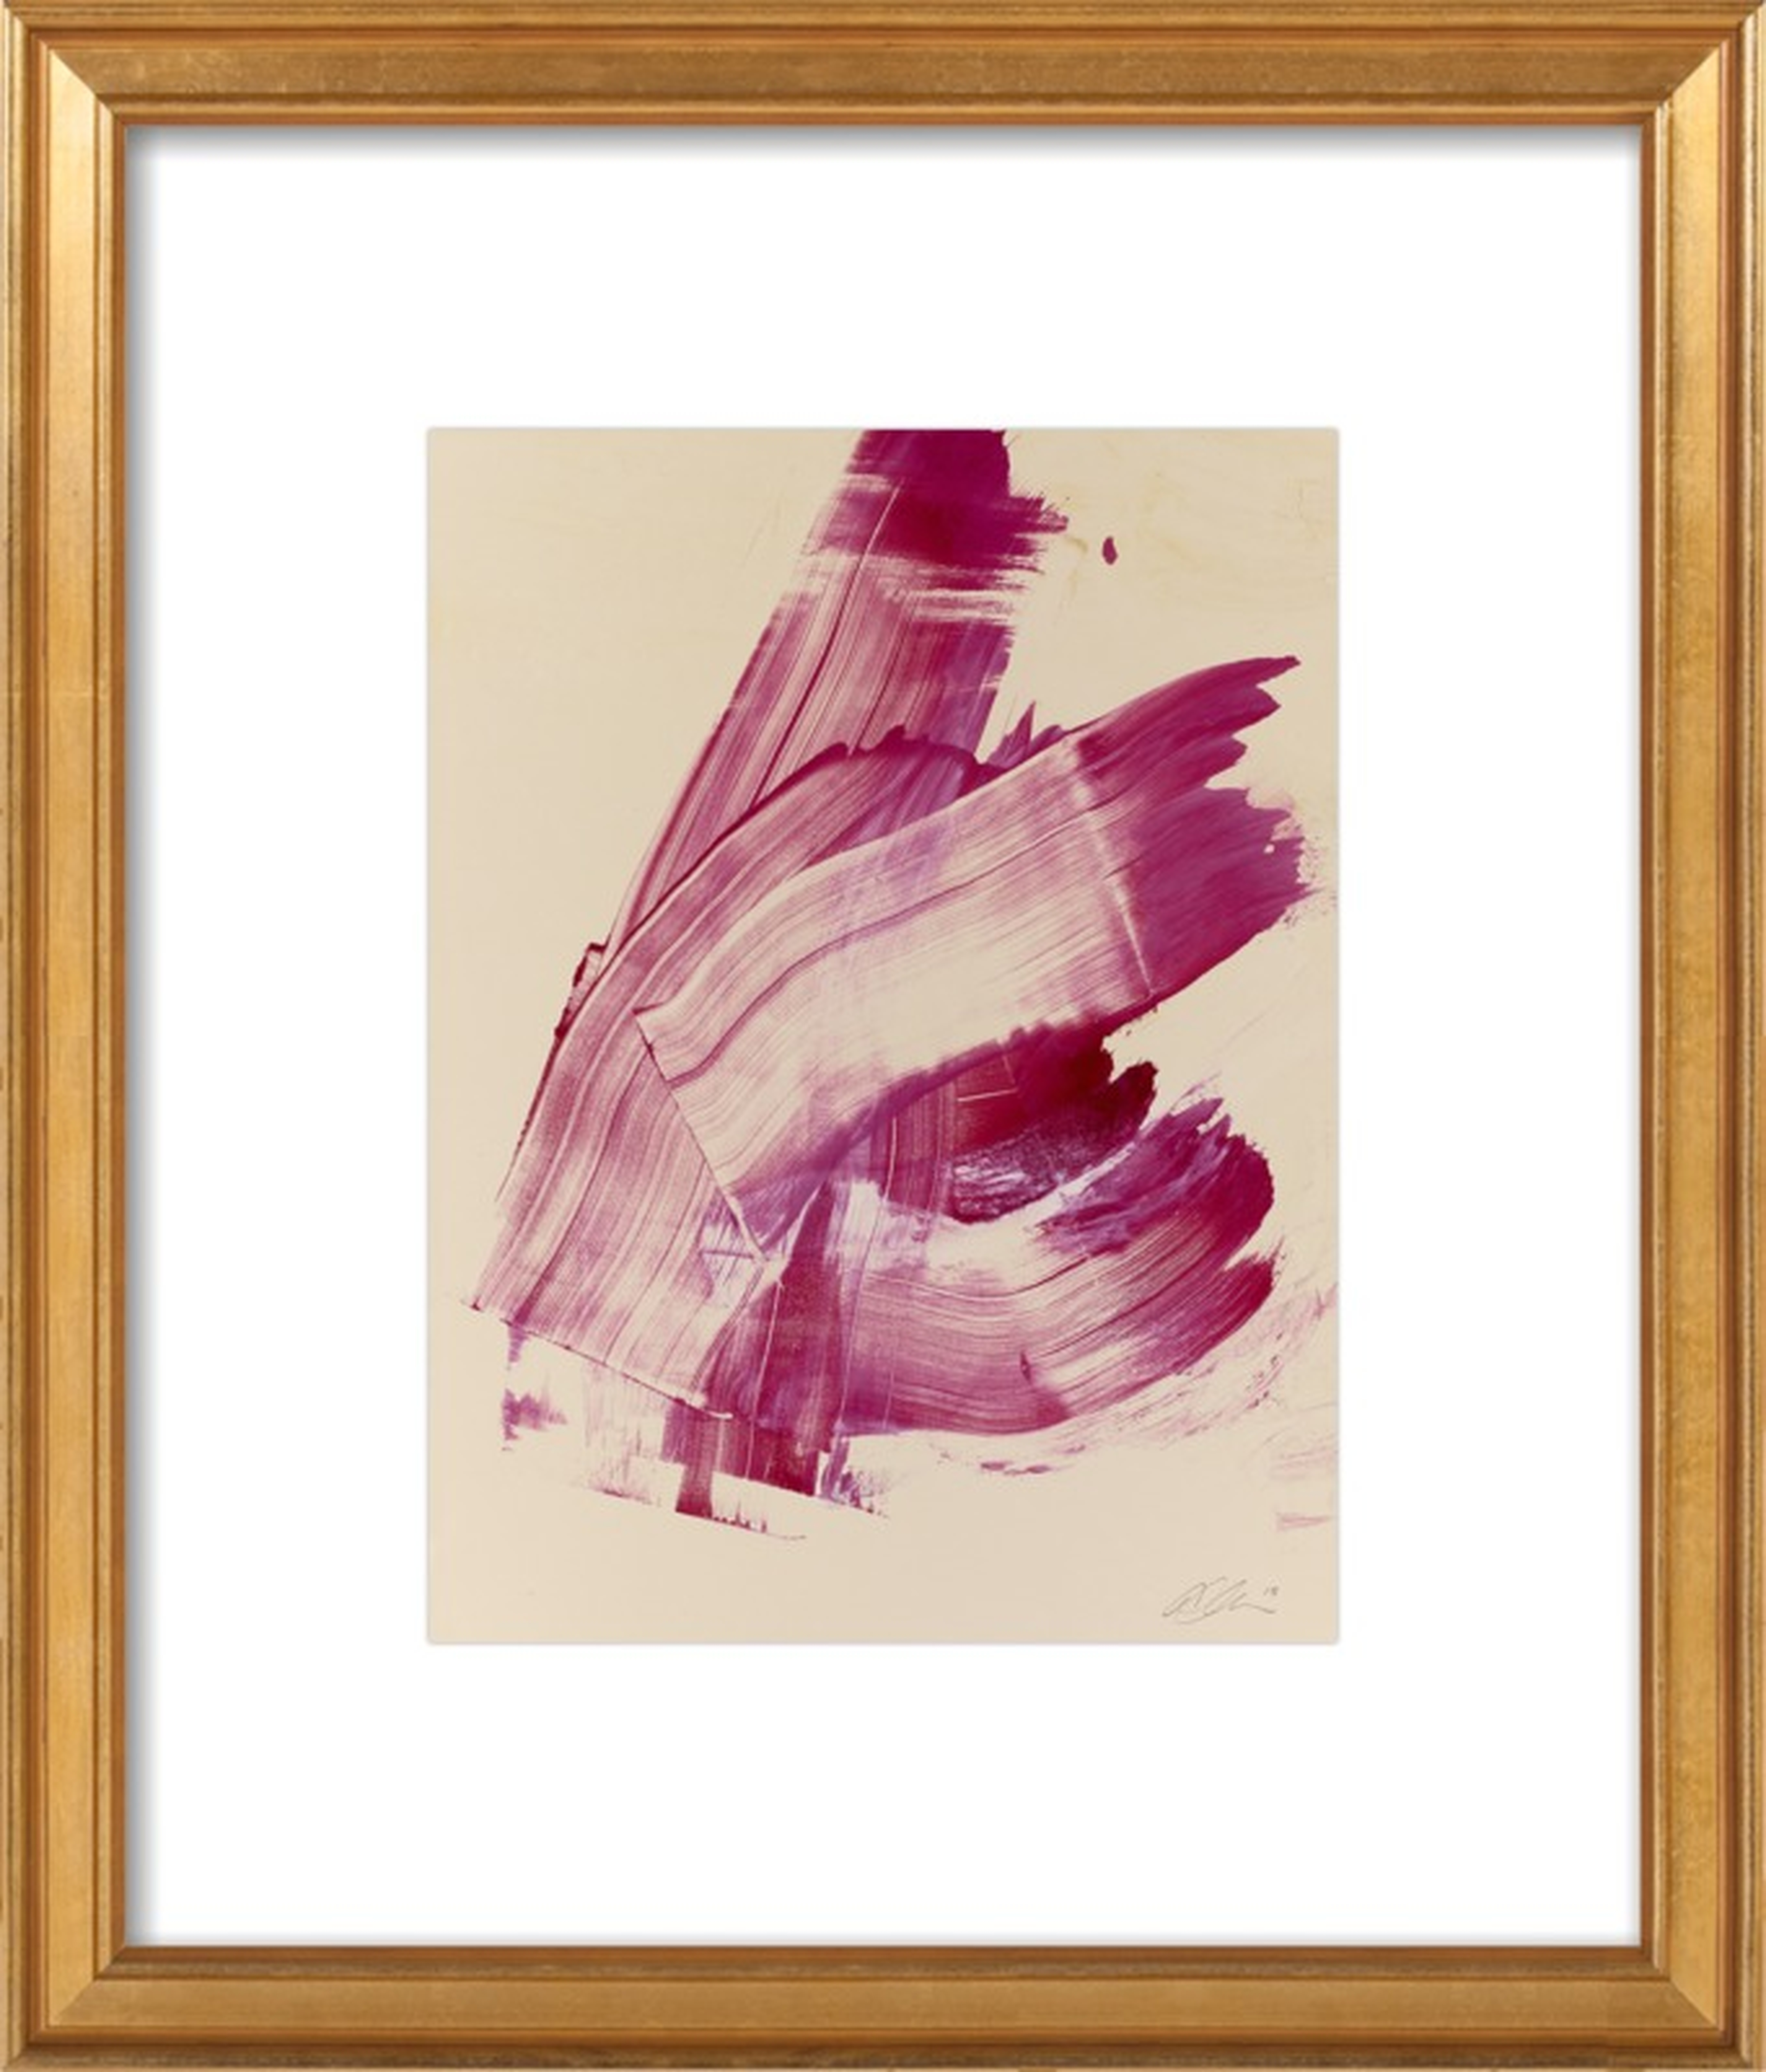 Hot Pink Abstract - 17x20" - Gold Leaf Wood Frame with Matte - Artfully Walls